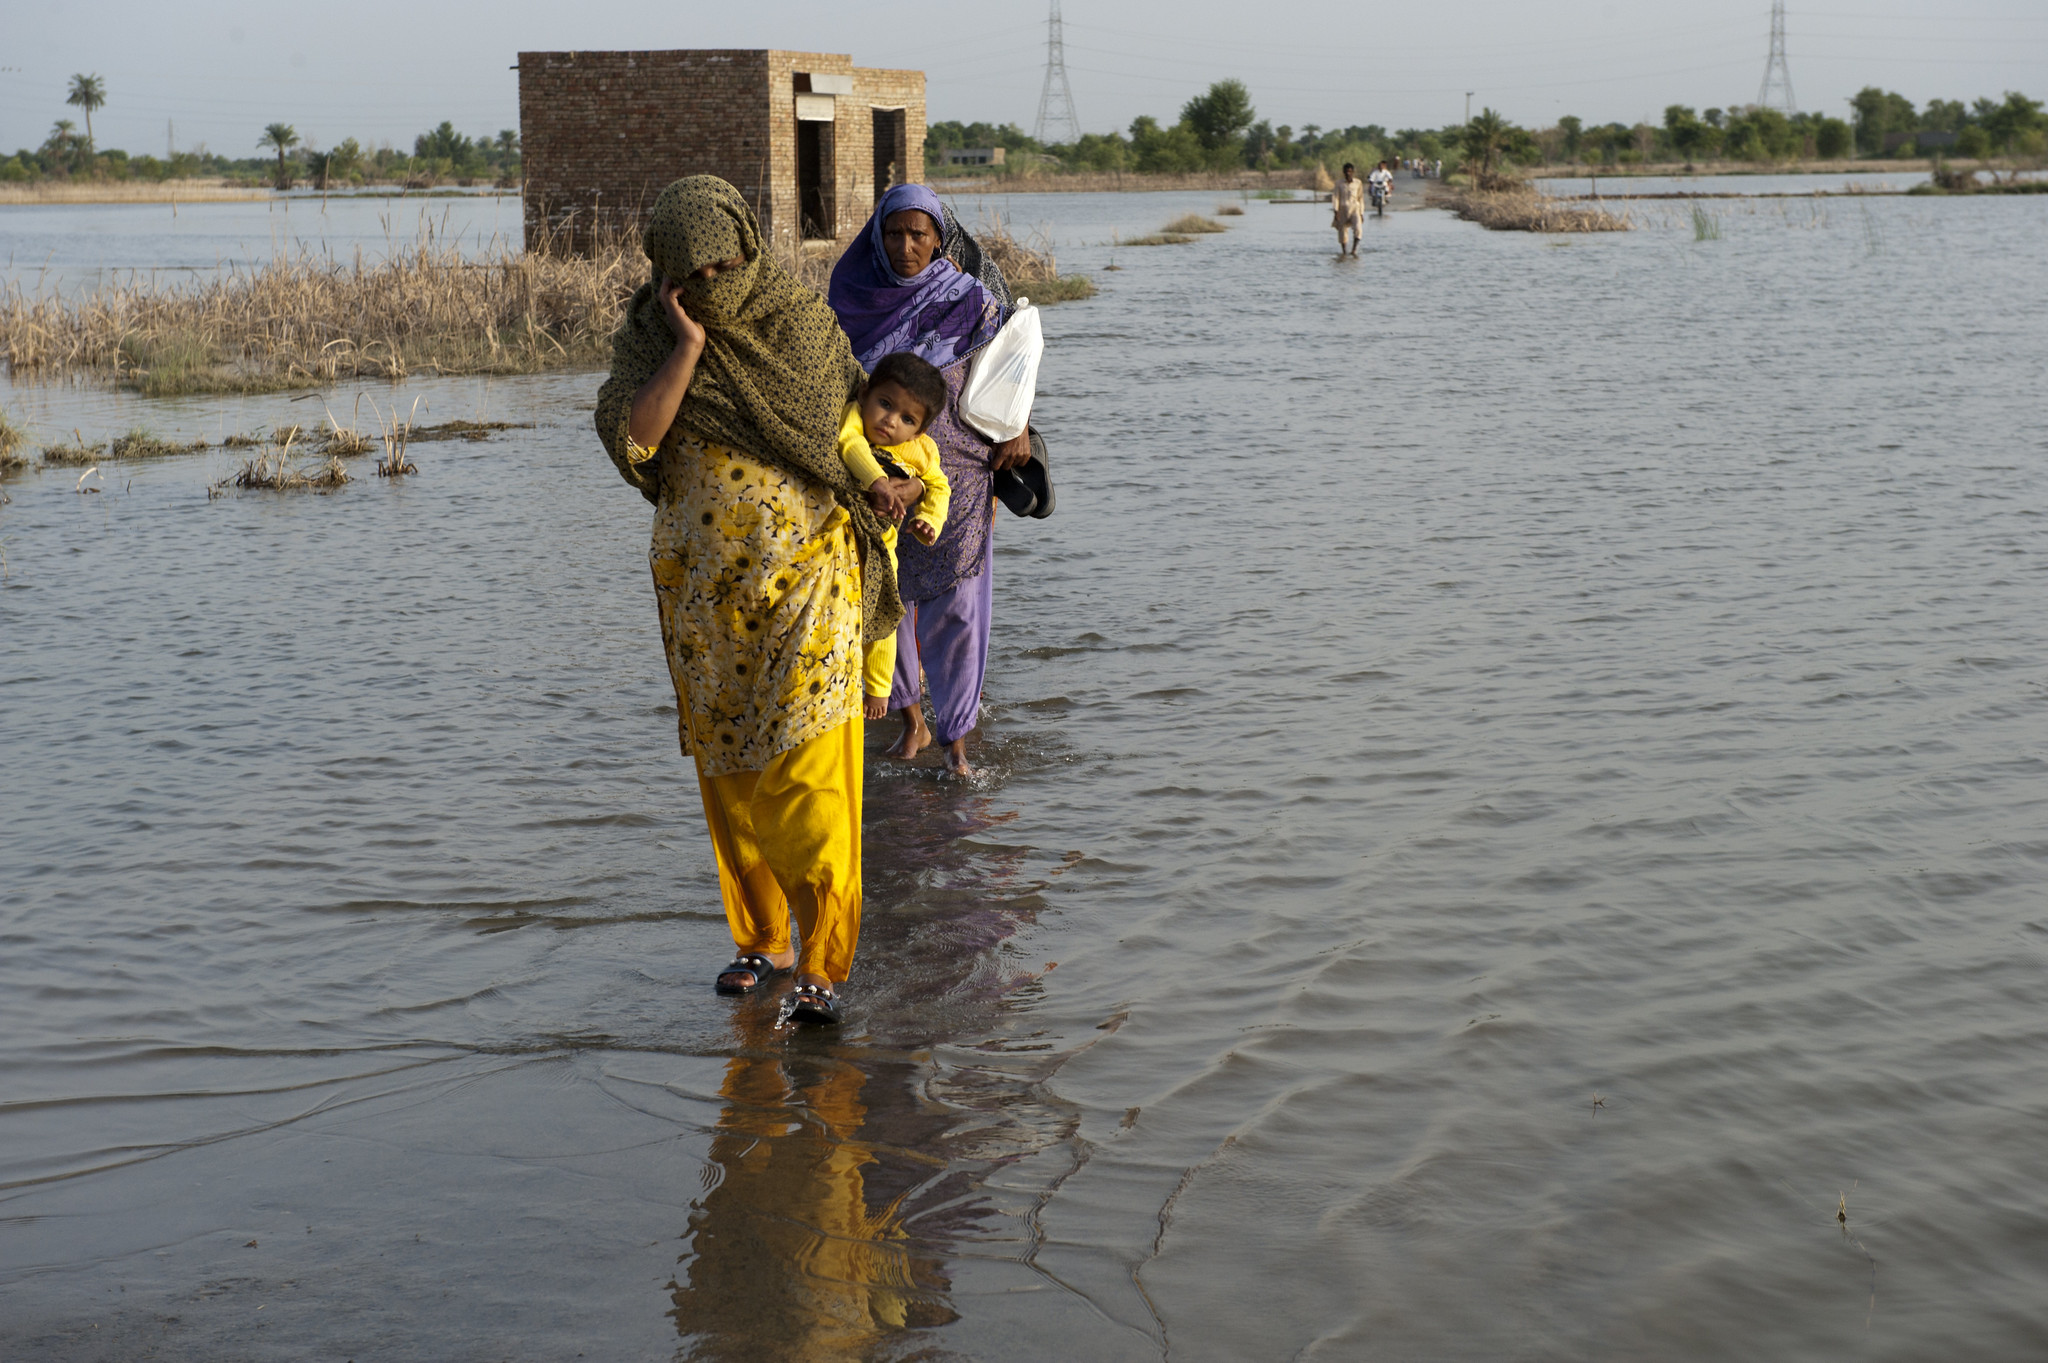 A family in Pakistan walks through flooded streets.